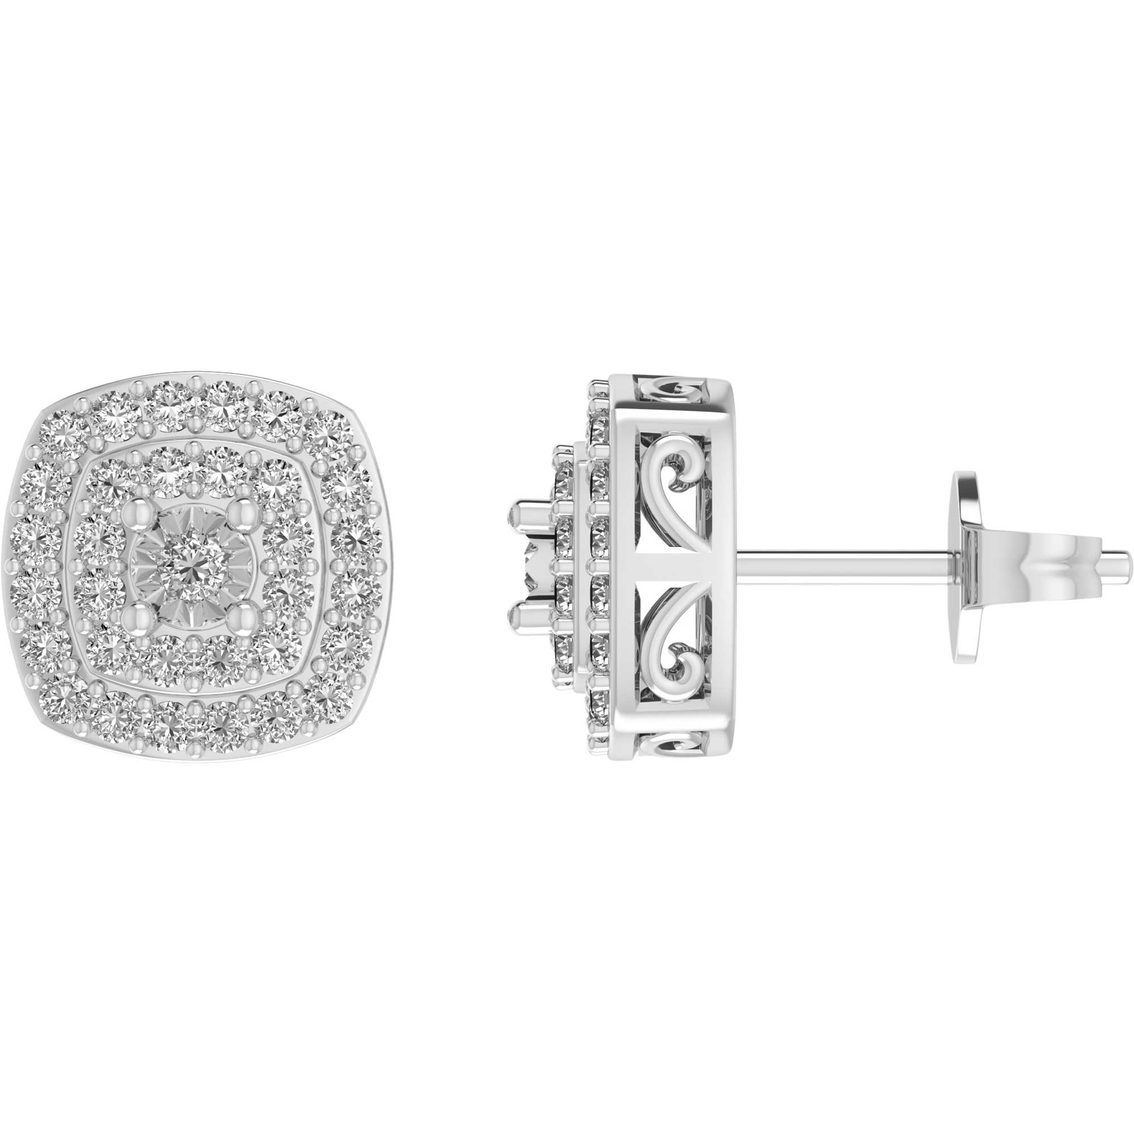 Sterling Silver 1 CTW Diamond Double Halo Pendant and Earring Set - Image 2 of 3